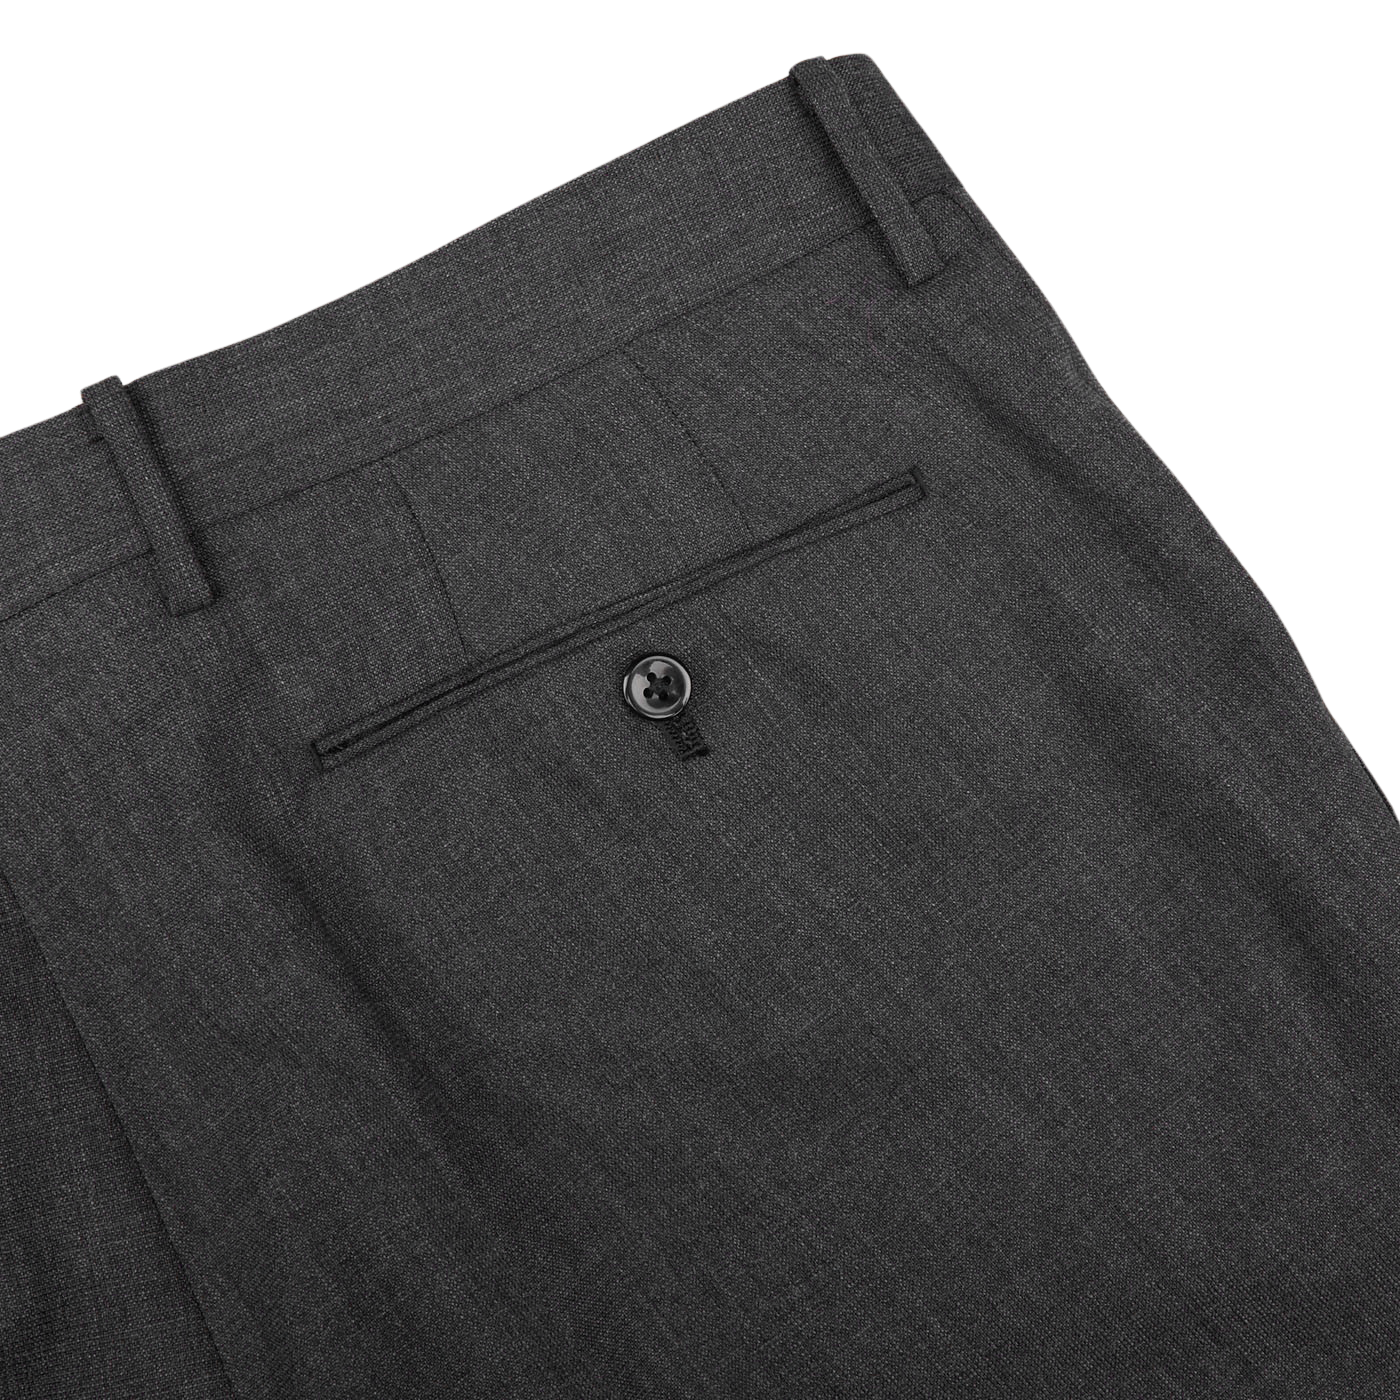 A close up image of lightweight Ring Jacket Grey High Twist Wool Suit pants made with wool fresco fabric.